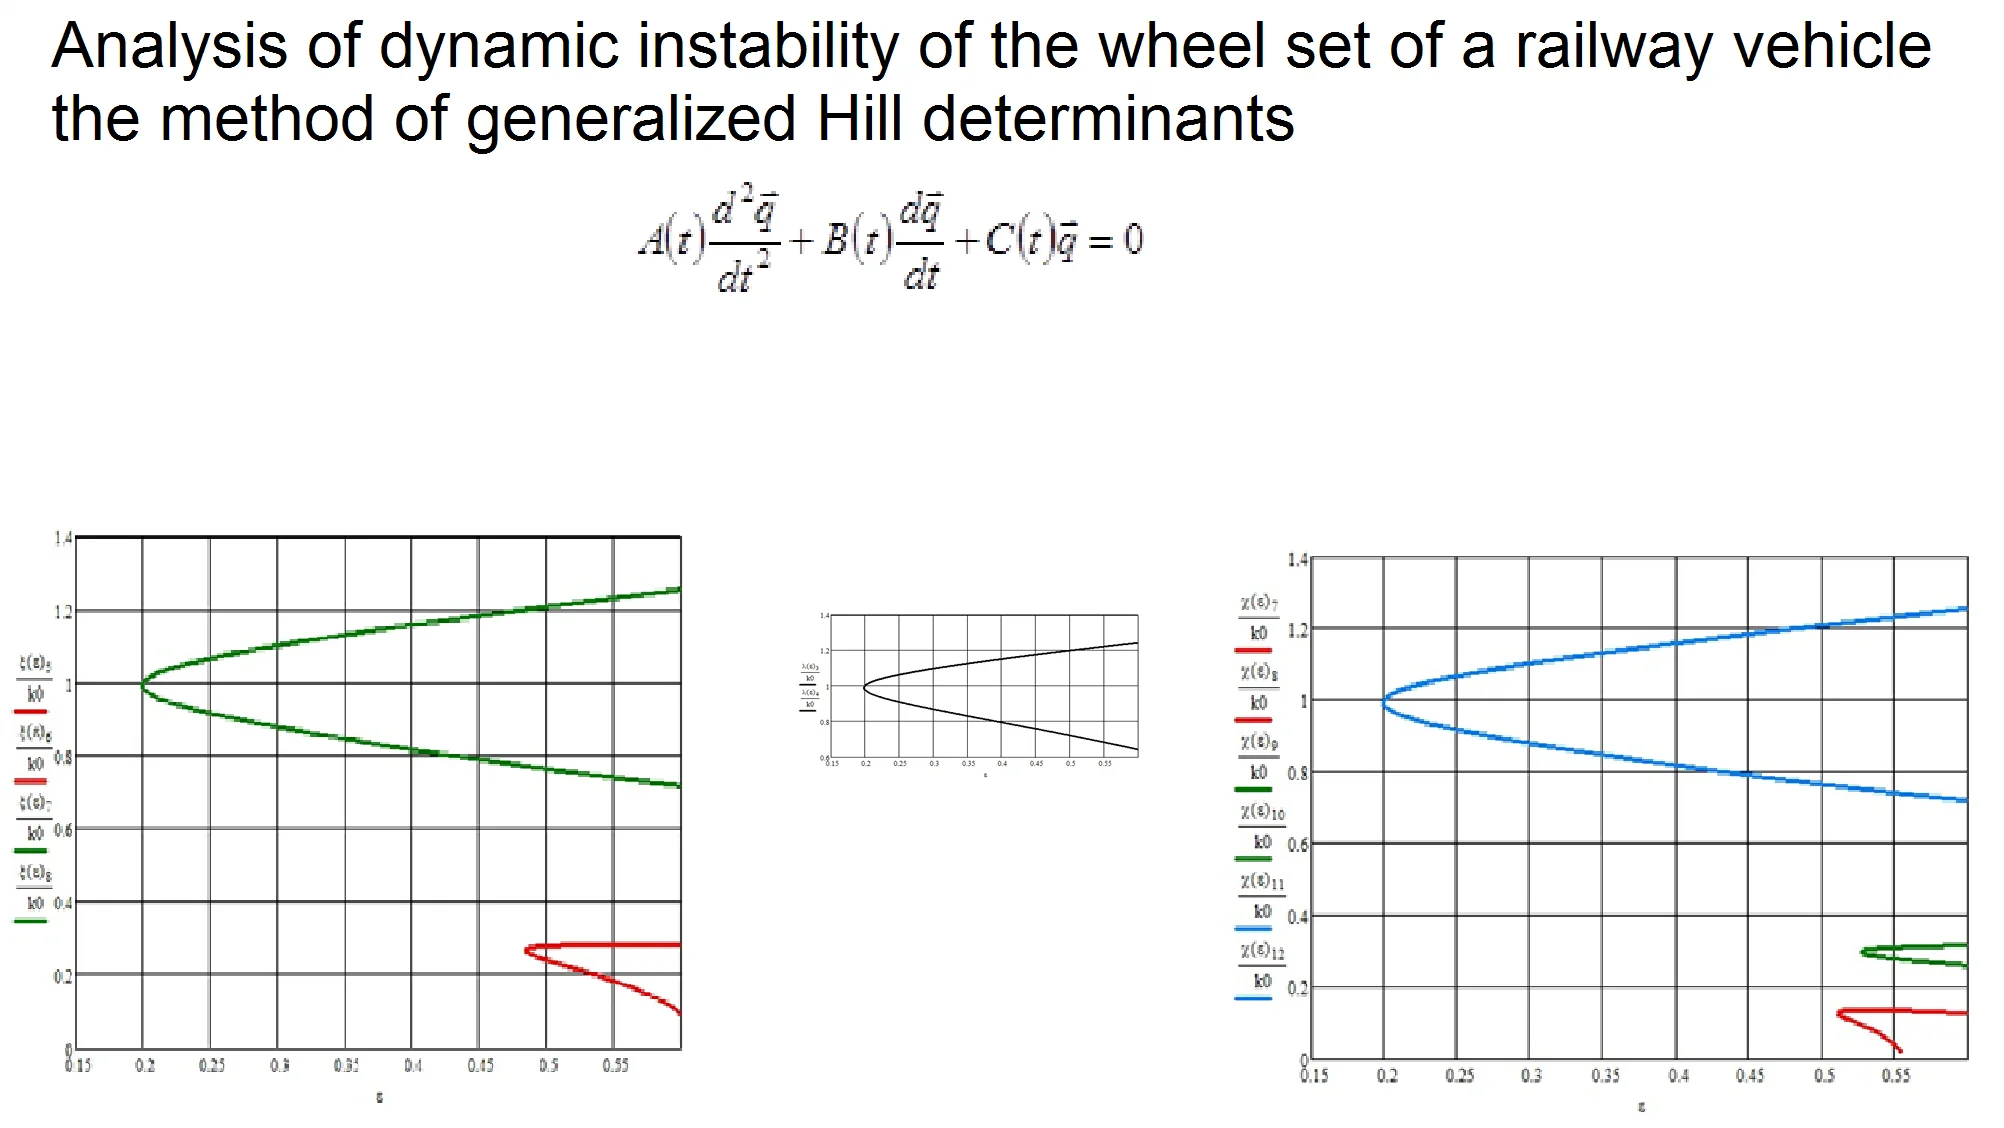 Analysis of dynamic instability of the wheel set of a railway vehicle using the method of generalized hill determinants